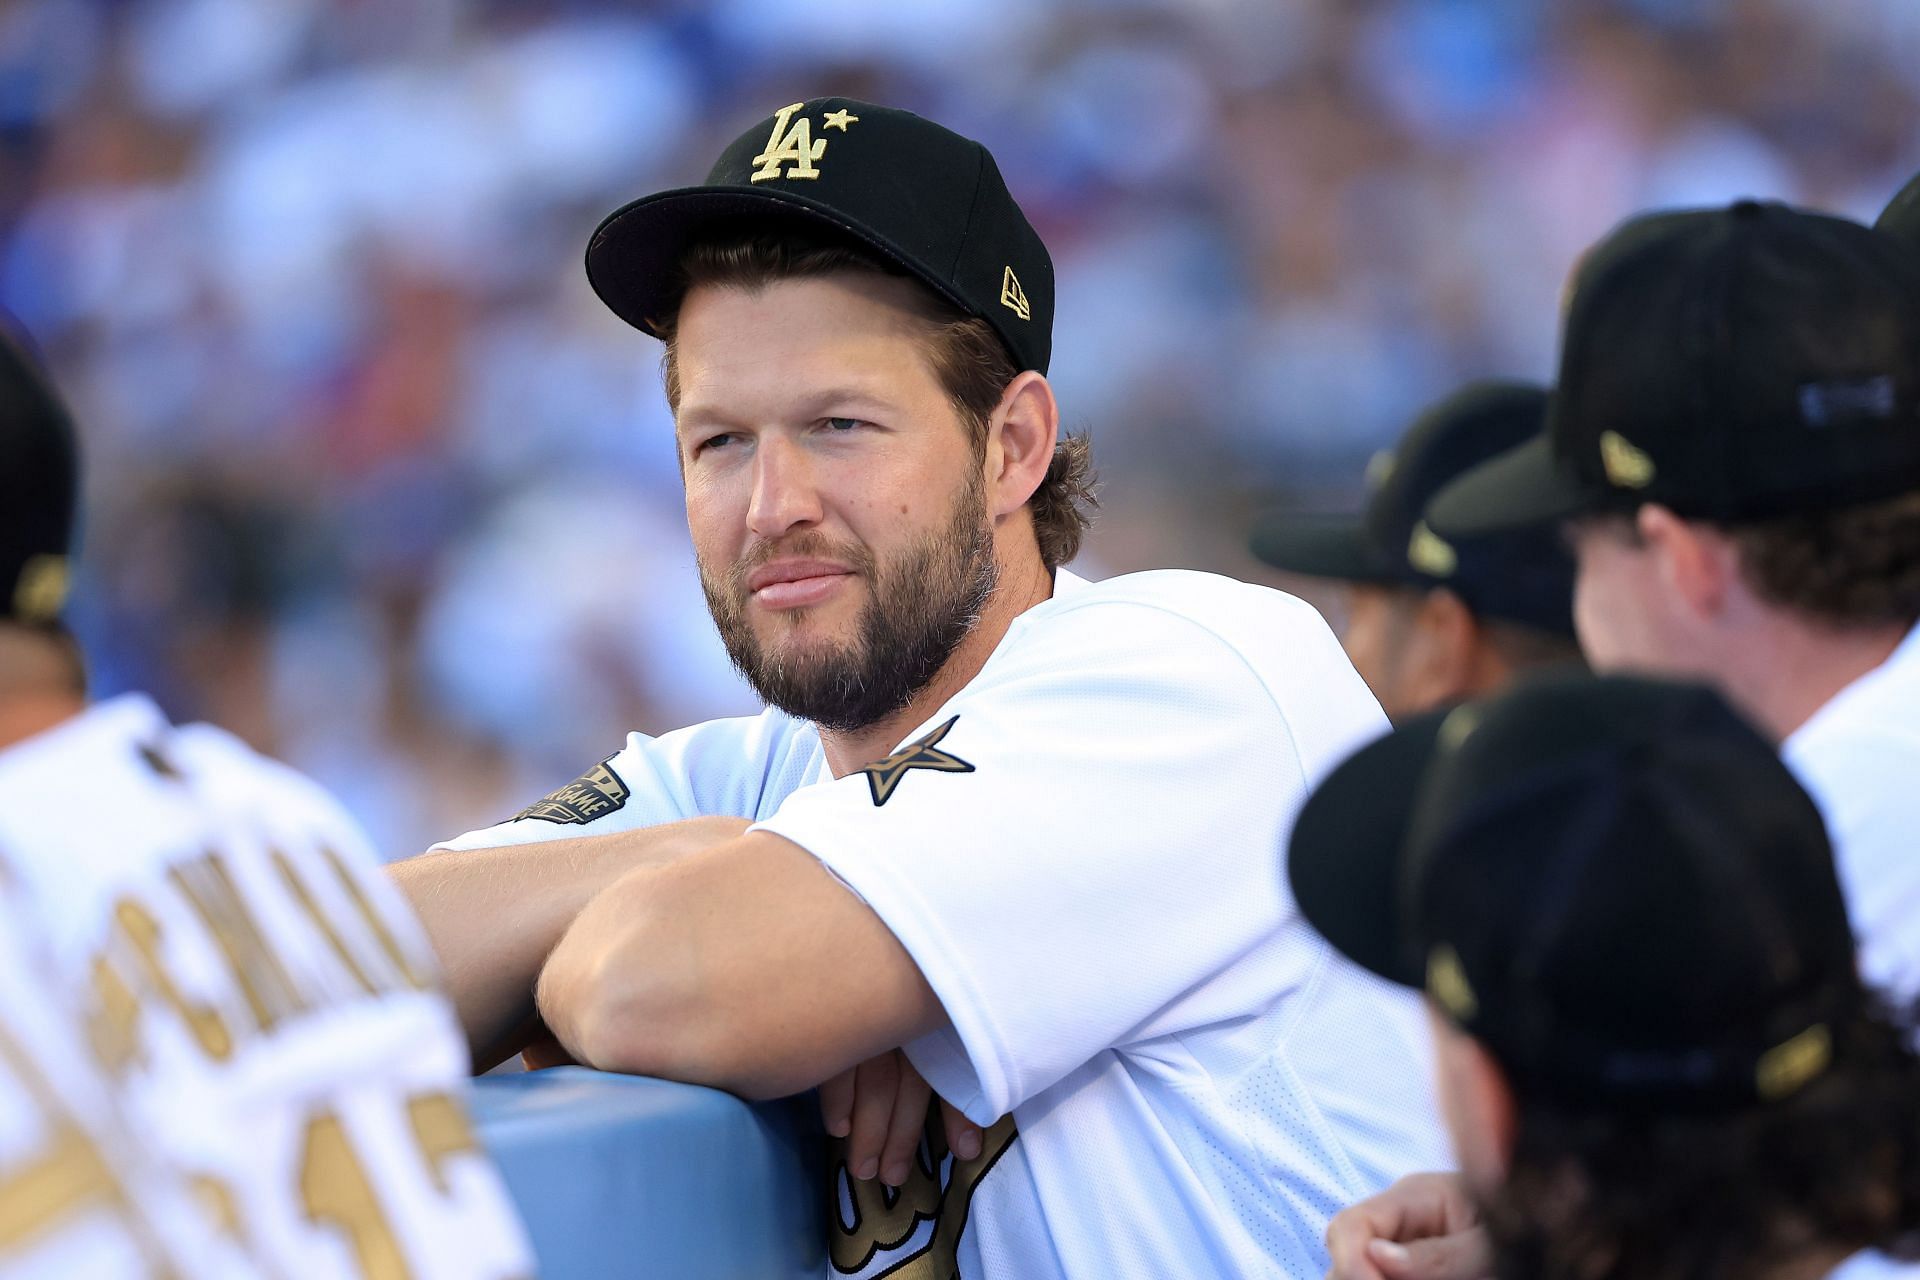 Clayton Kershaw watches from the dugout during the 92nd MLB All-Star Game presented by Mastercard.